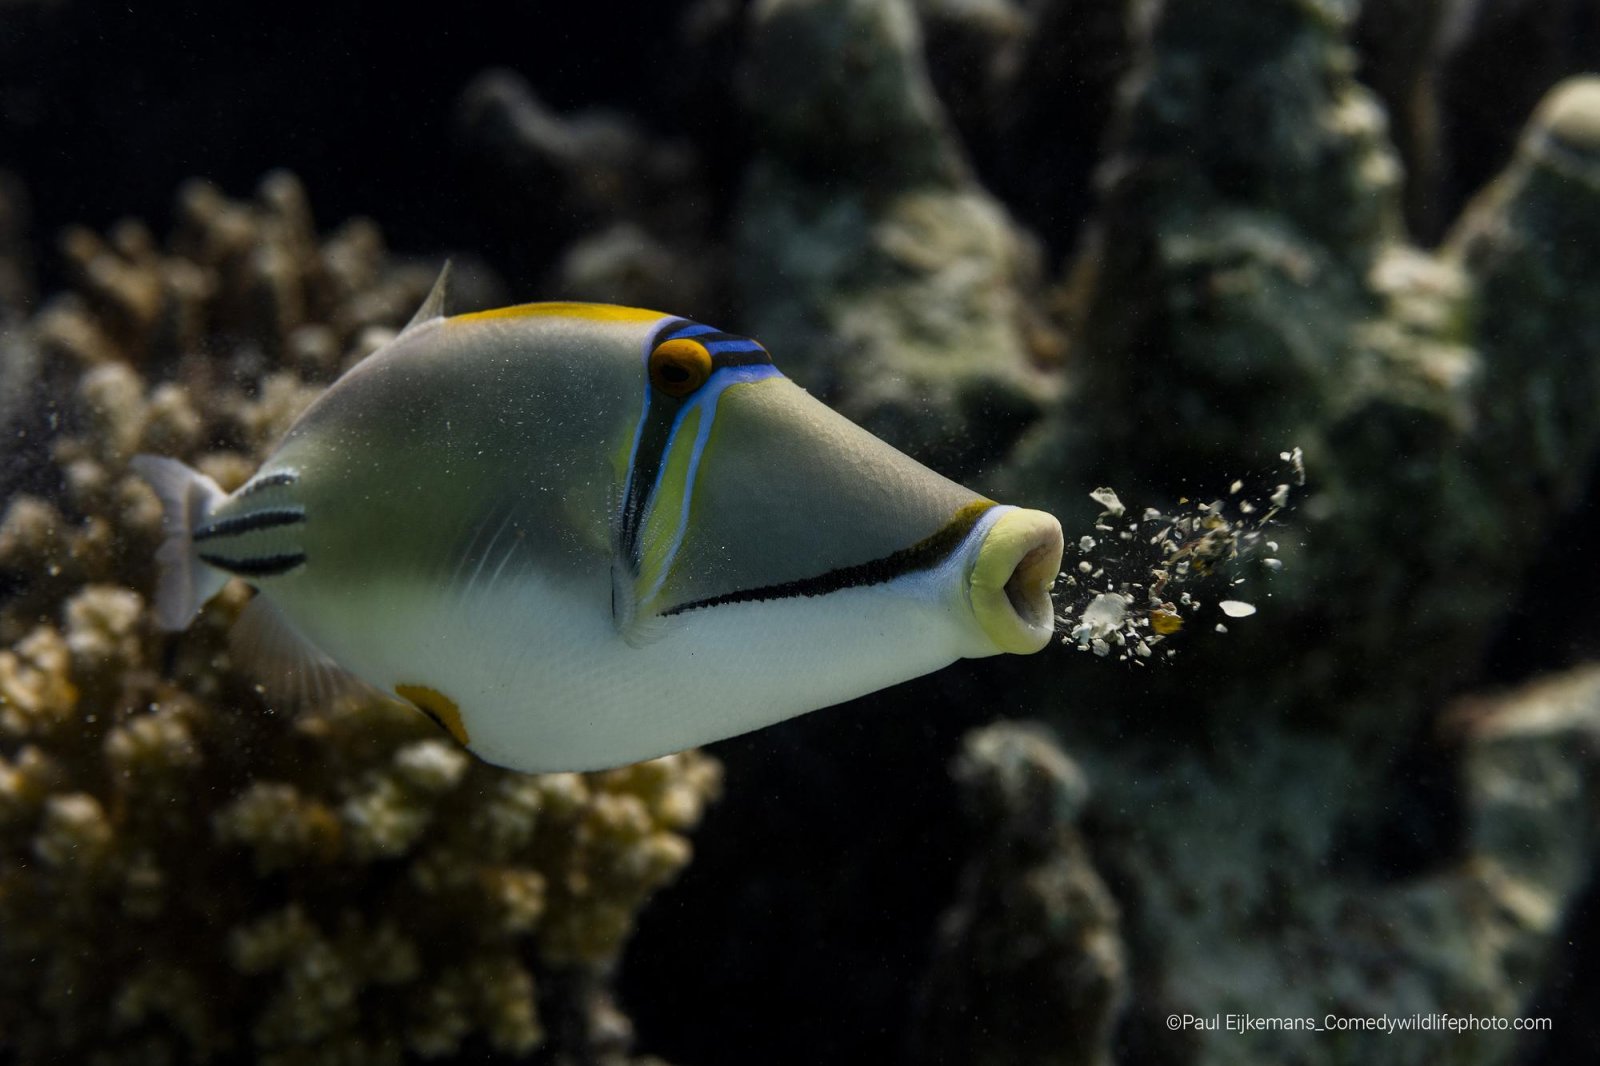 Underwater image of a Picasso Triggerfish vomiting coral residues. Coral wall behind it.